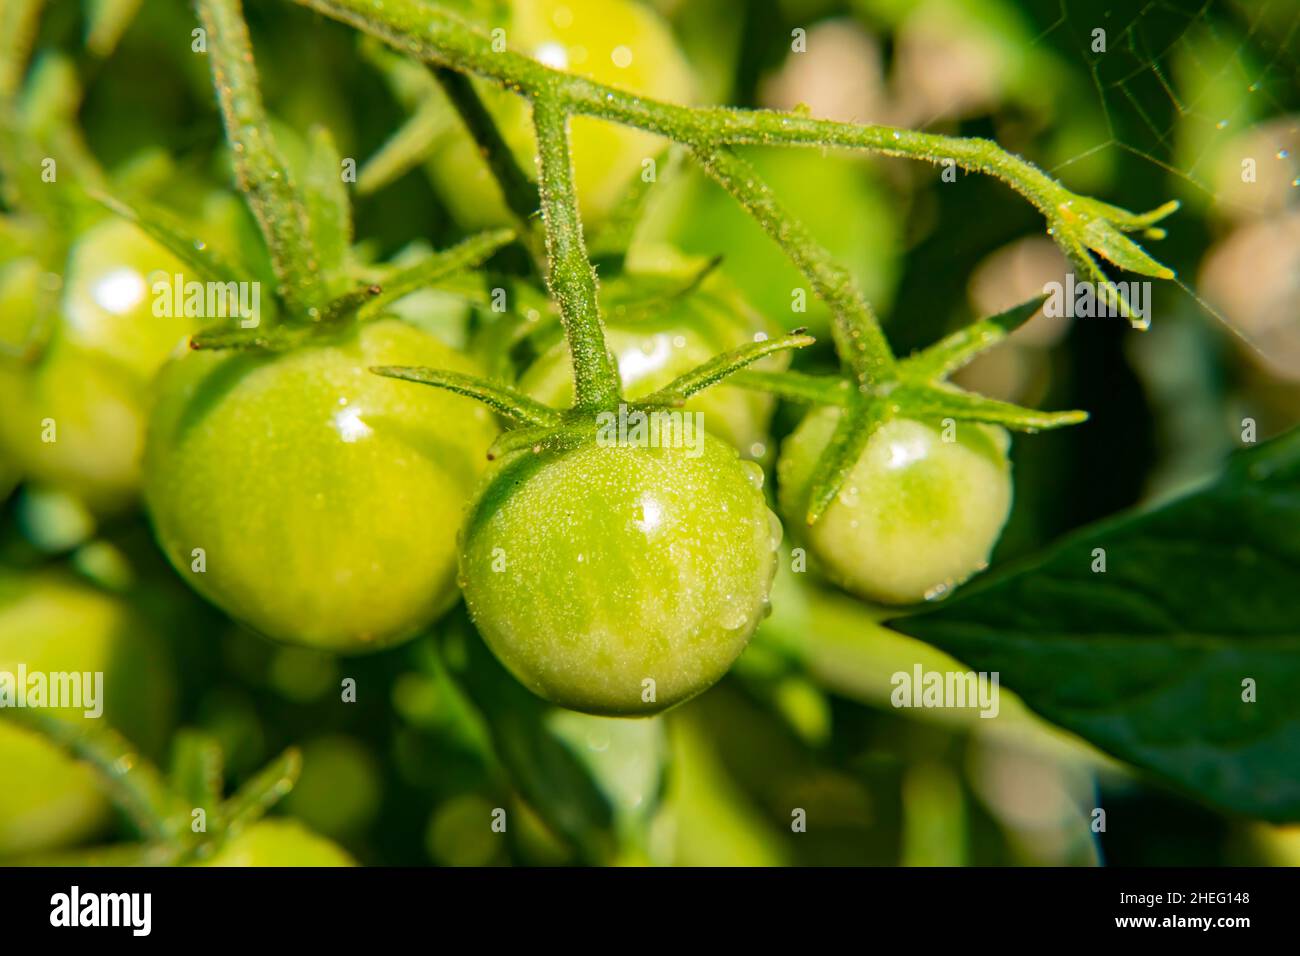 Growing tomato in farm garden at Los Angeles Stock Photo